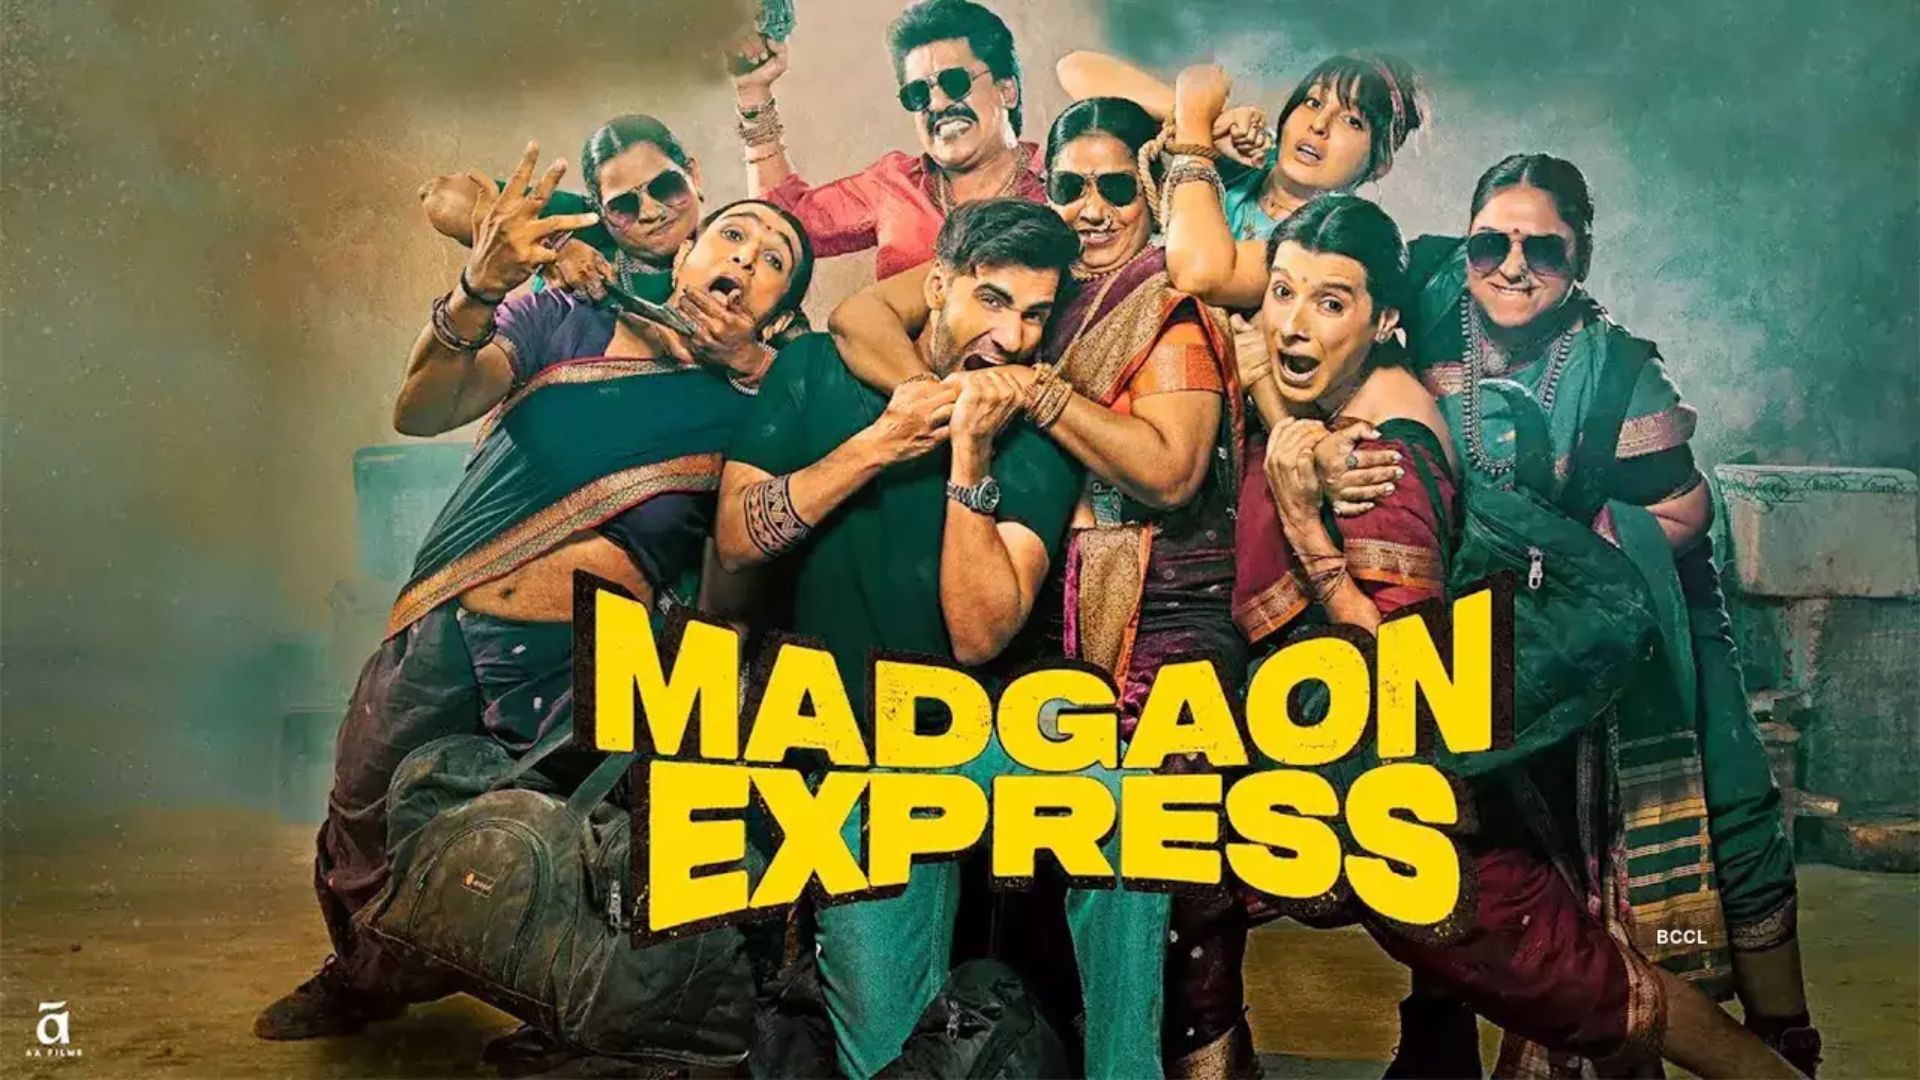 ‘Madgaon Express’ day 1 box office collection: Did the comedy drama spring a surprise?